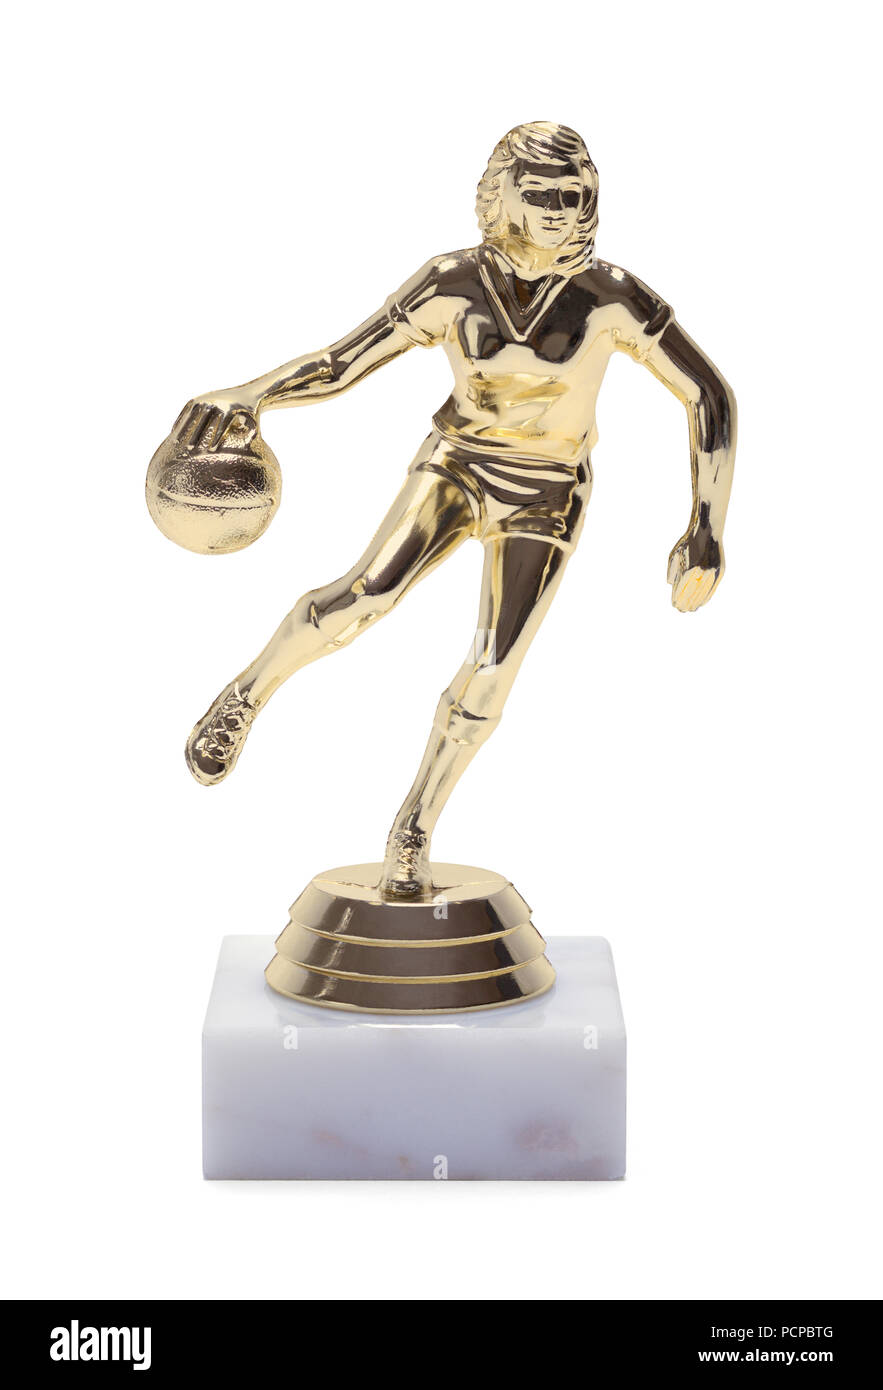 Gold Womans Basketball Trophy Isolated on a White Background. Stock Photo